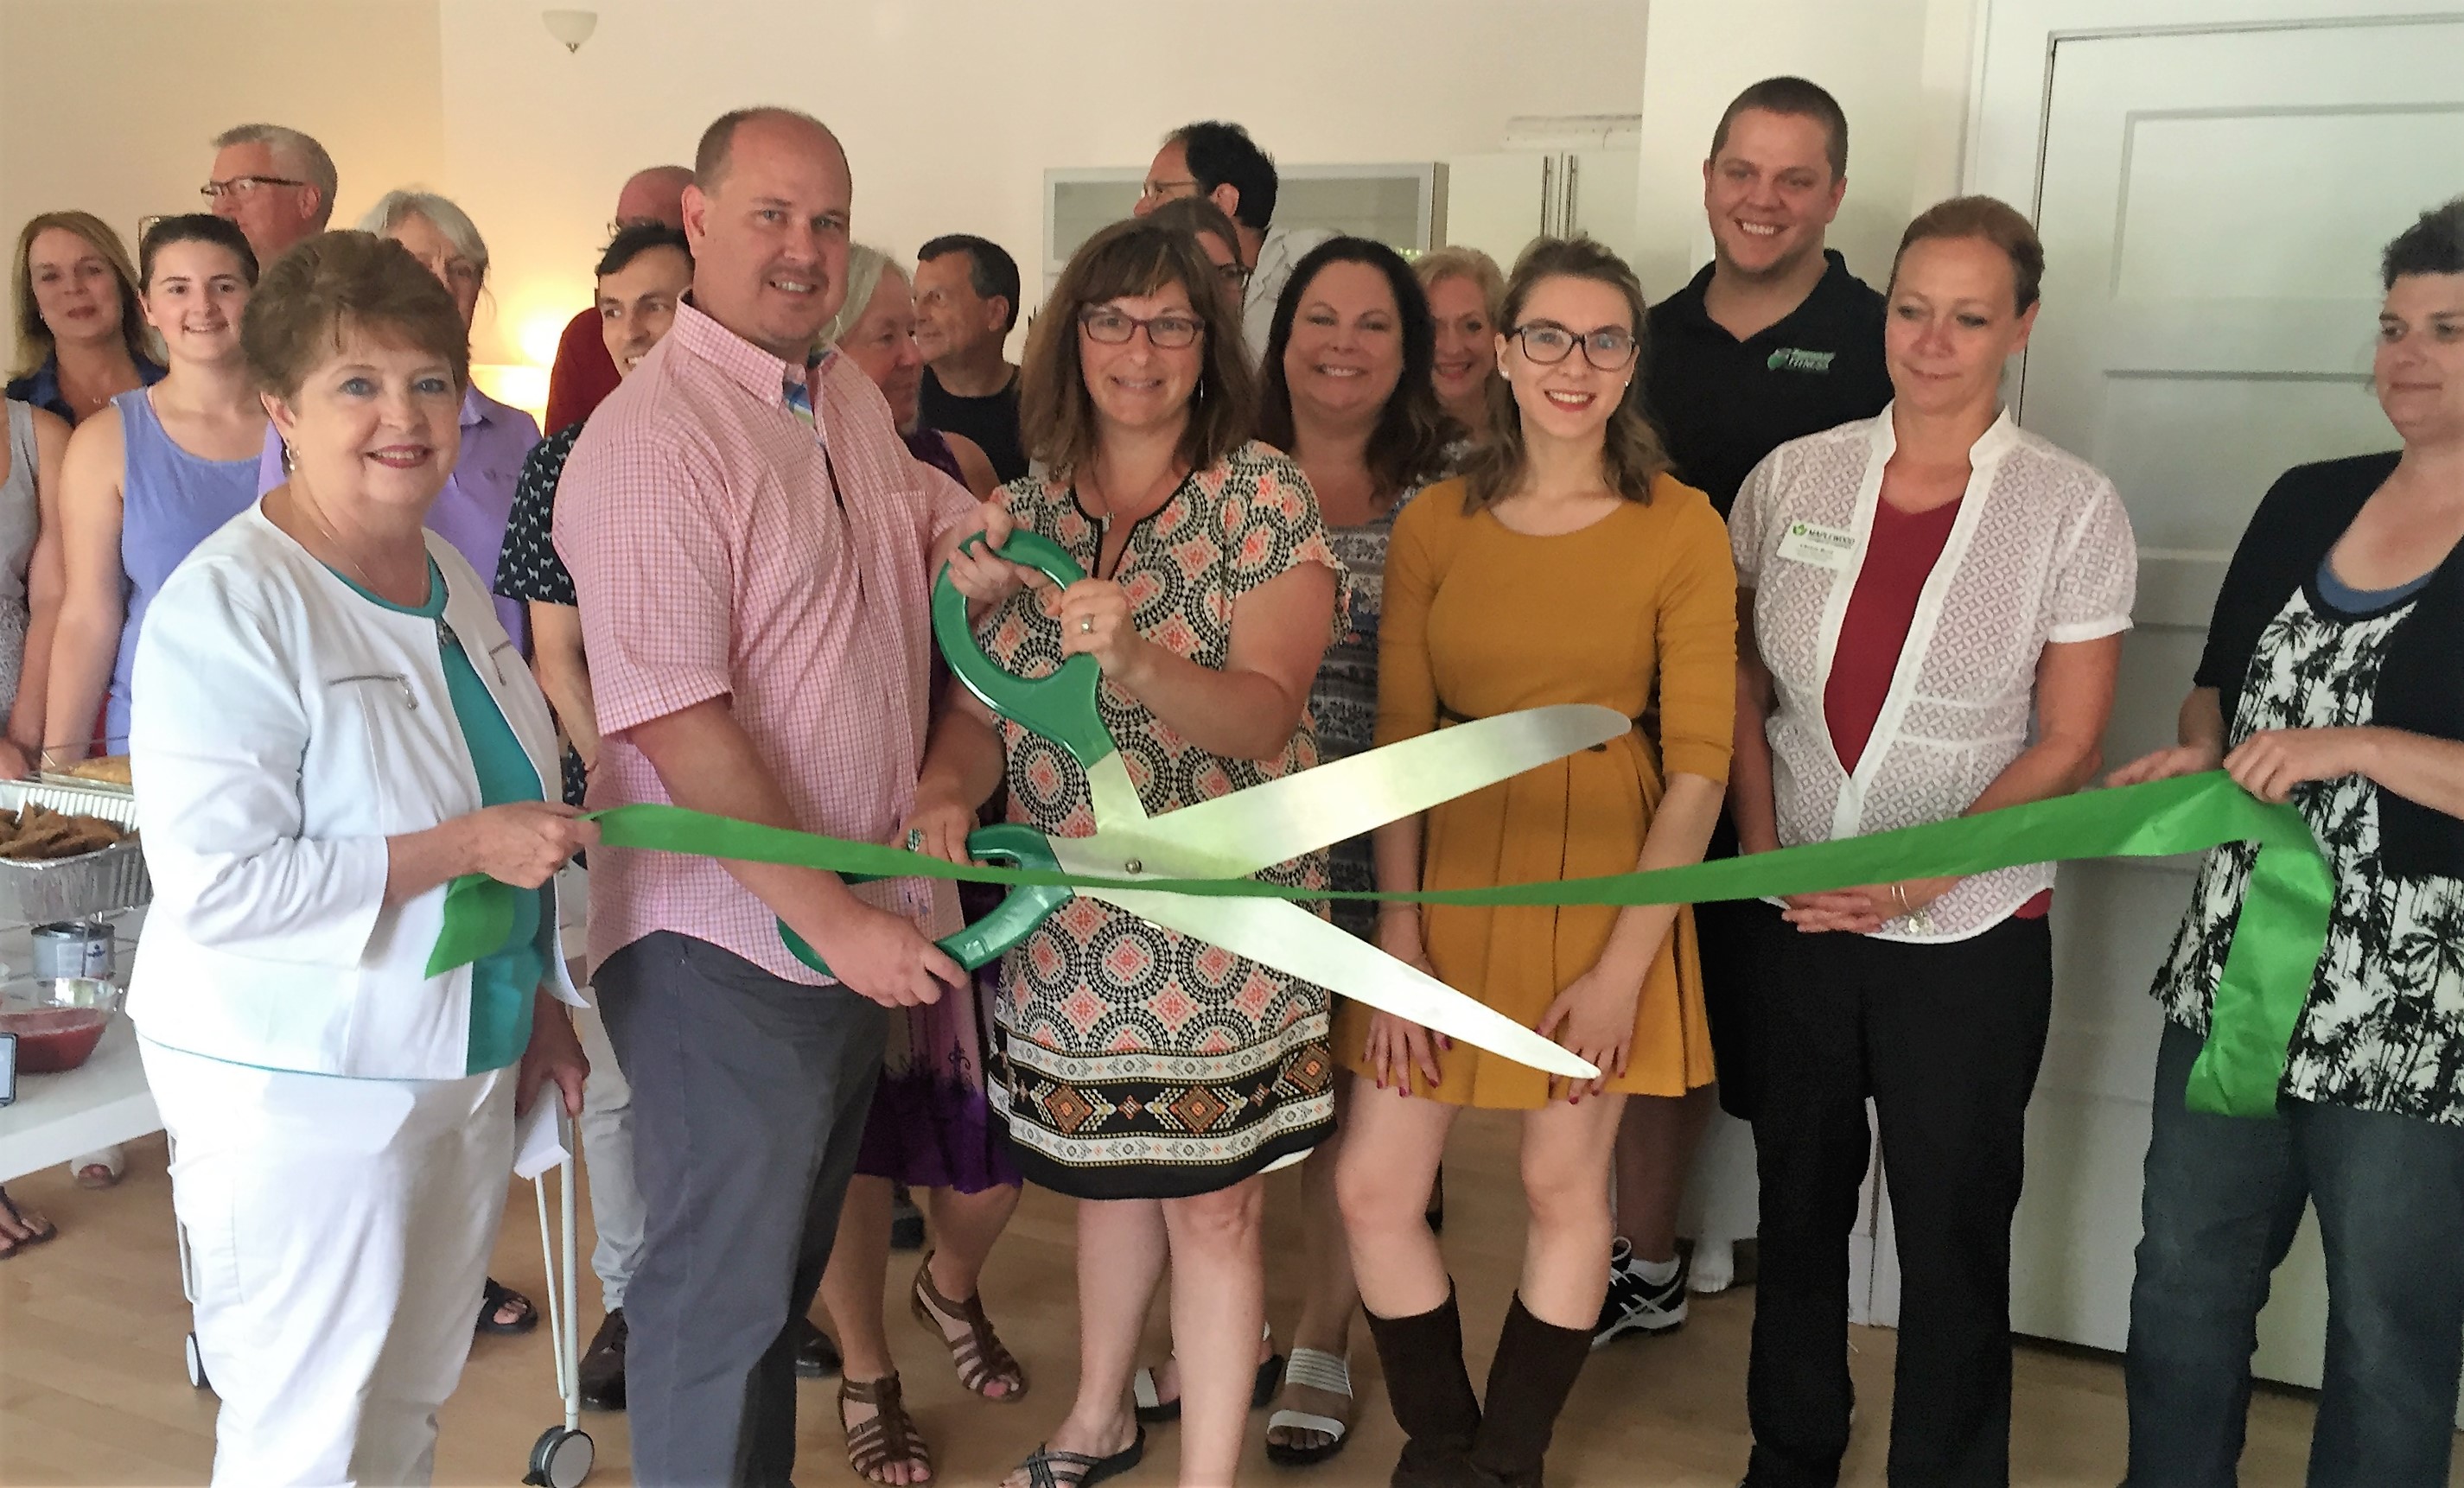 Maplewood Chamber of Commerce welcomed 3 new businesses in July